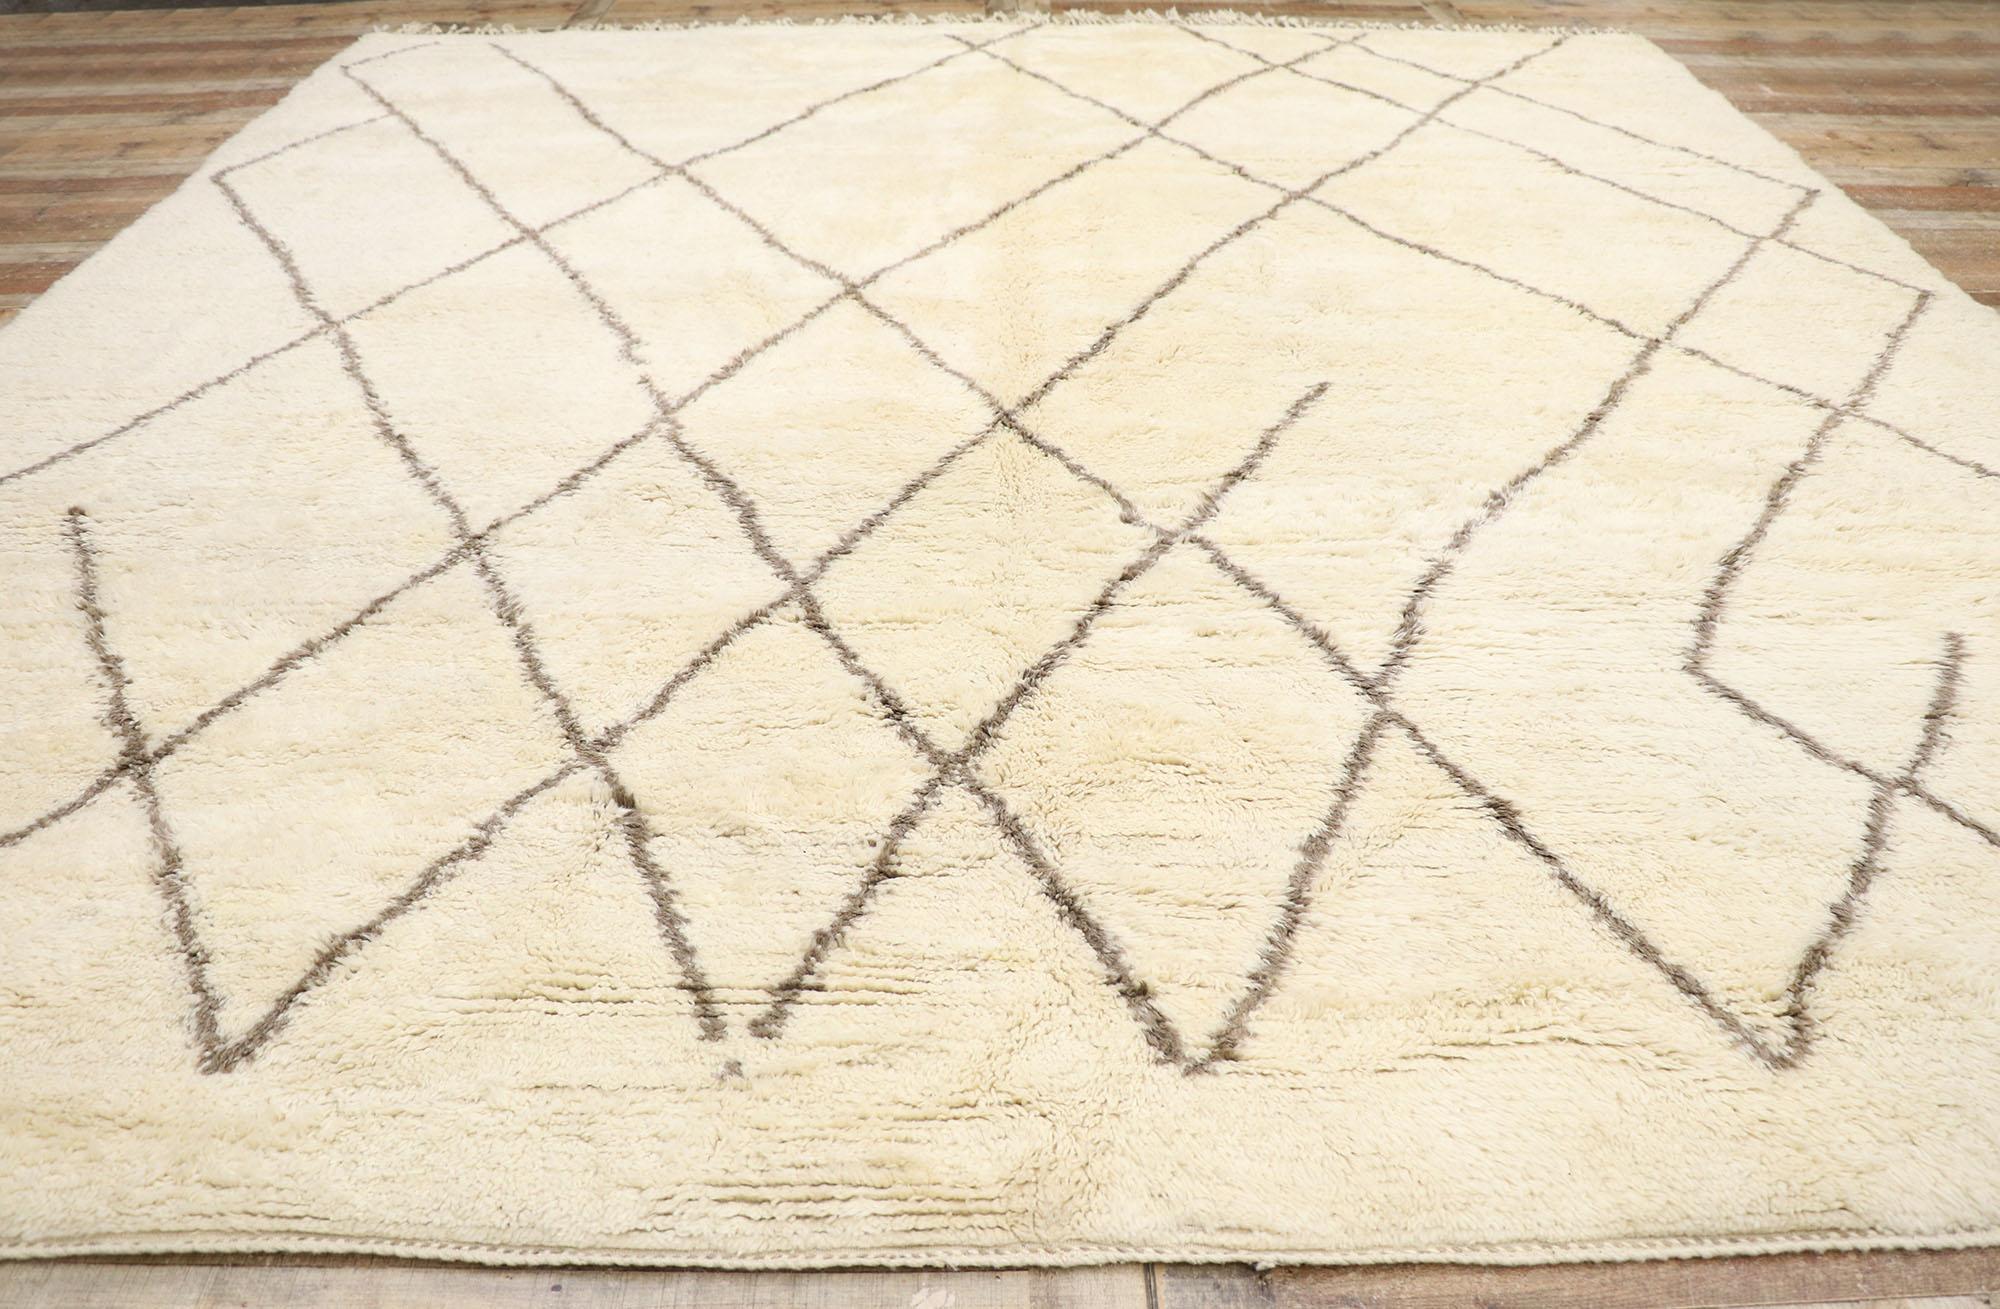 New Contemporary Moroccan Rug with Mid-Century Modern Style and Hygge Vibes 2